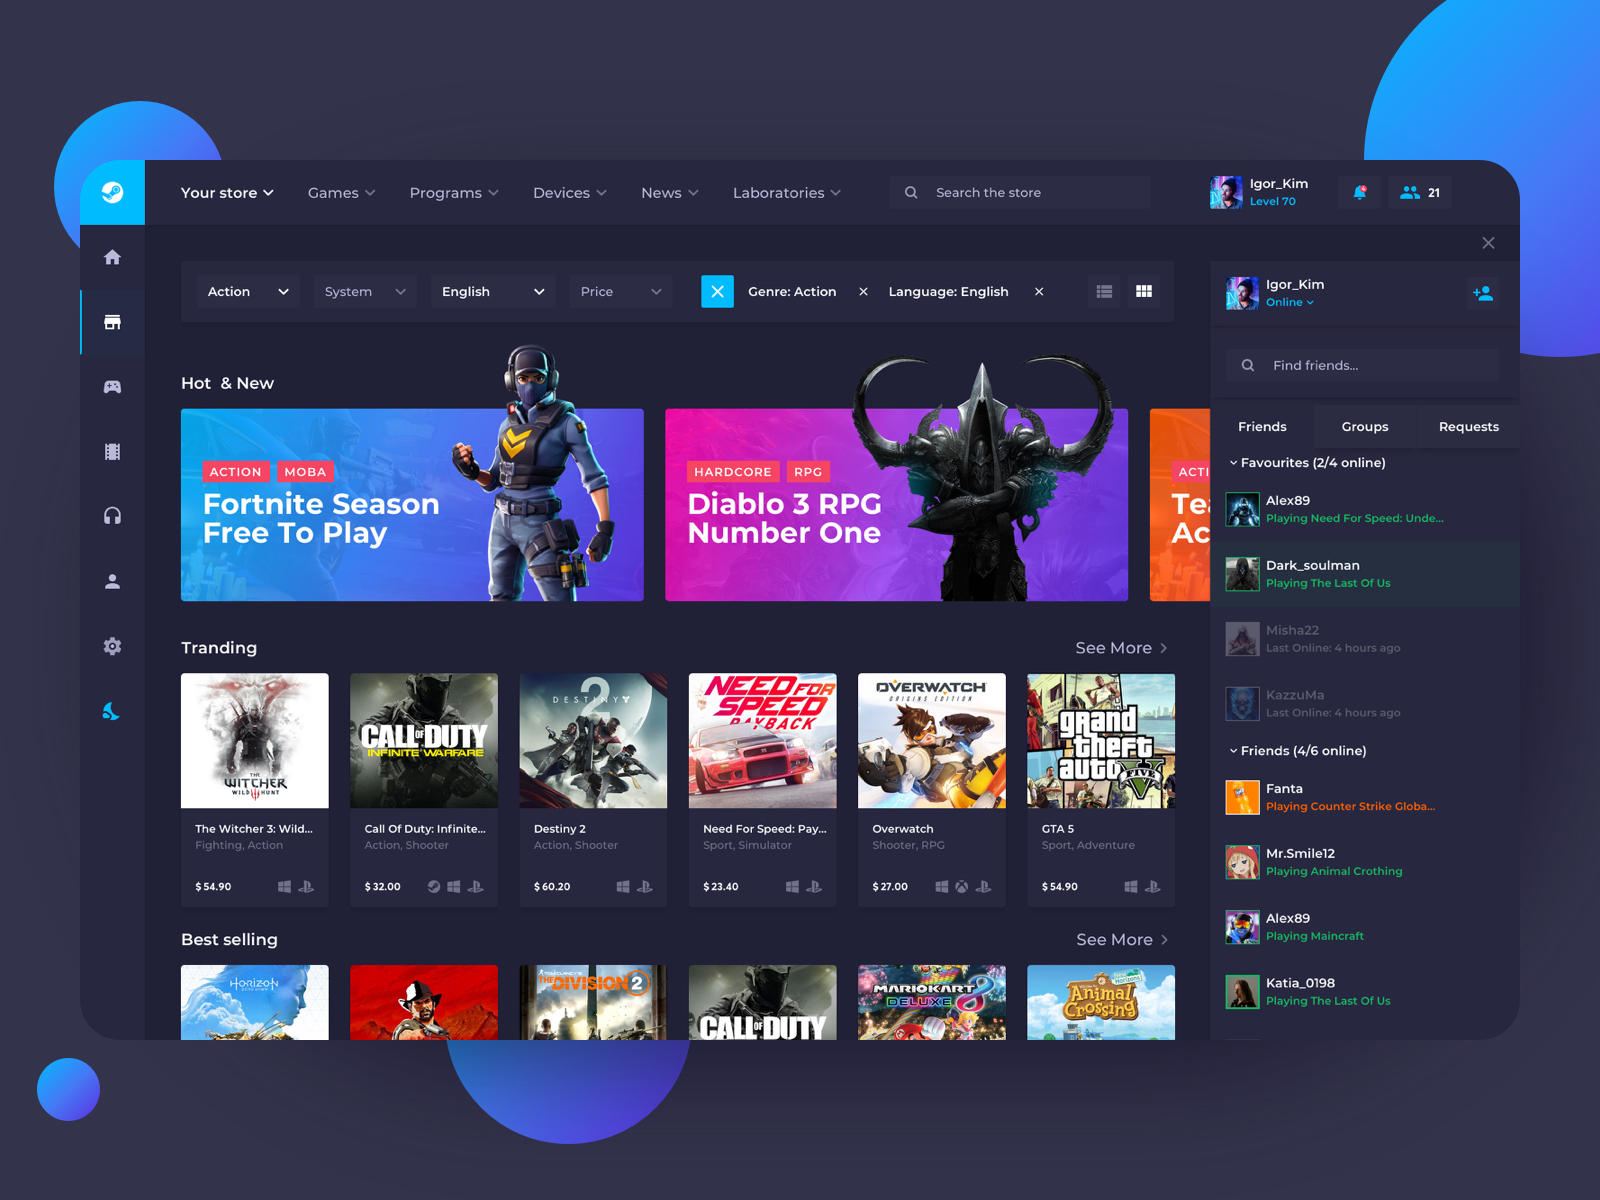 Steam Store App Concept by Lay on Dribbble